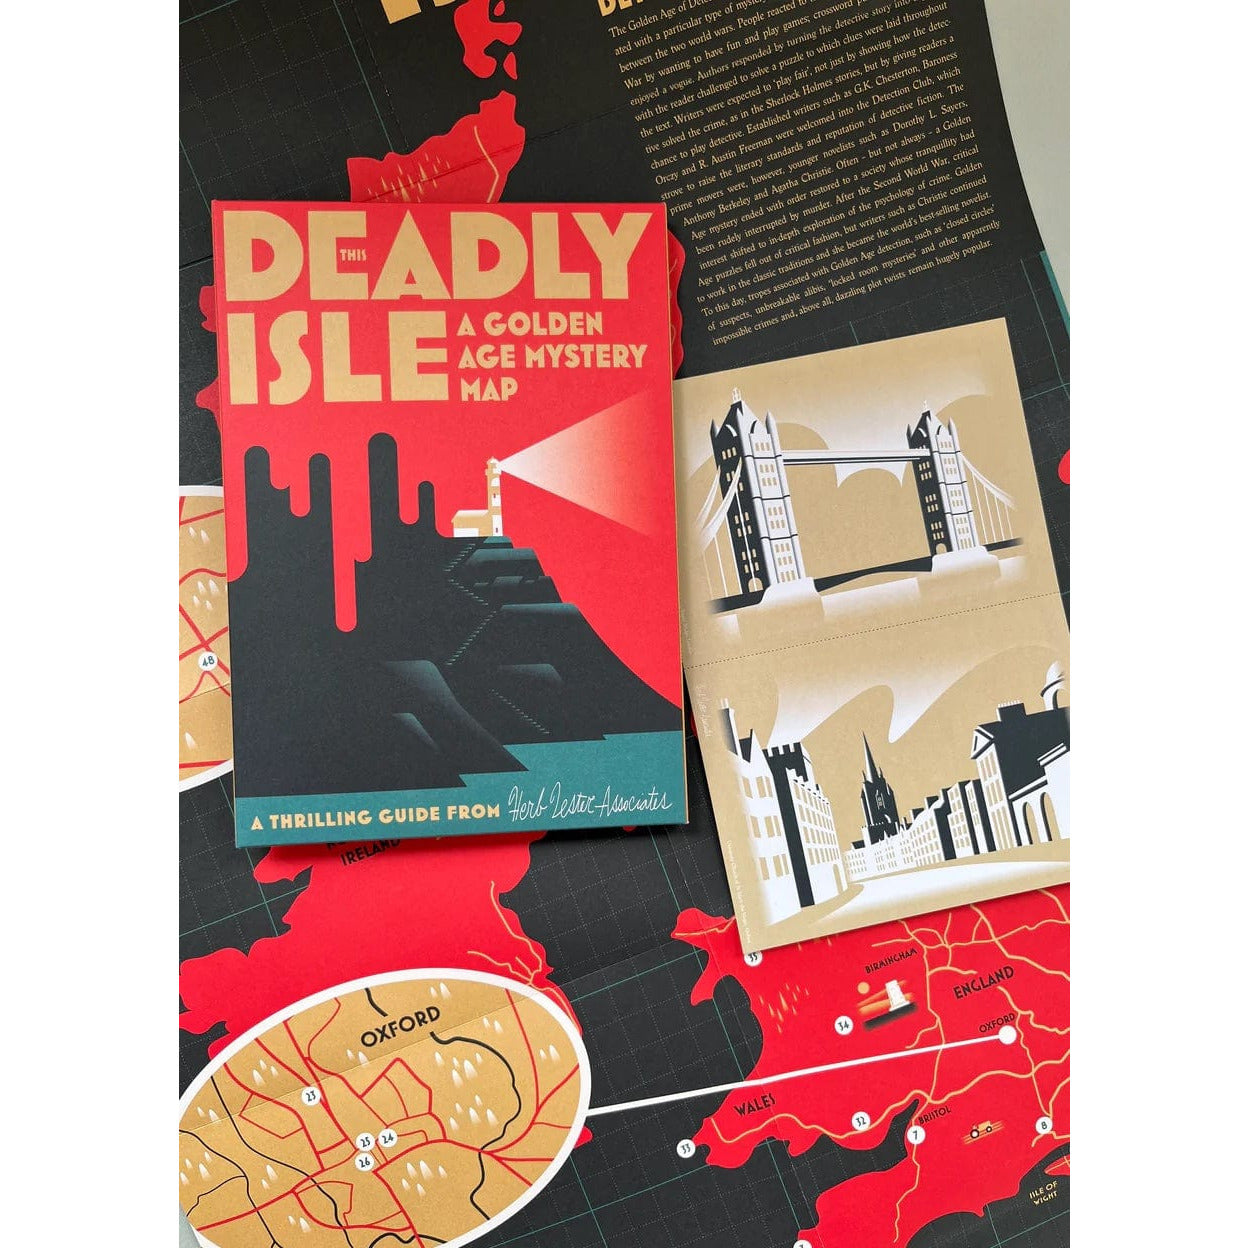 This Deadly Isle | A Gold Age Mystery Map BookGeek